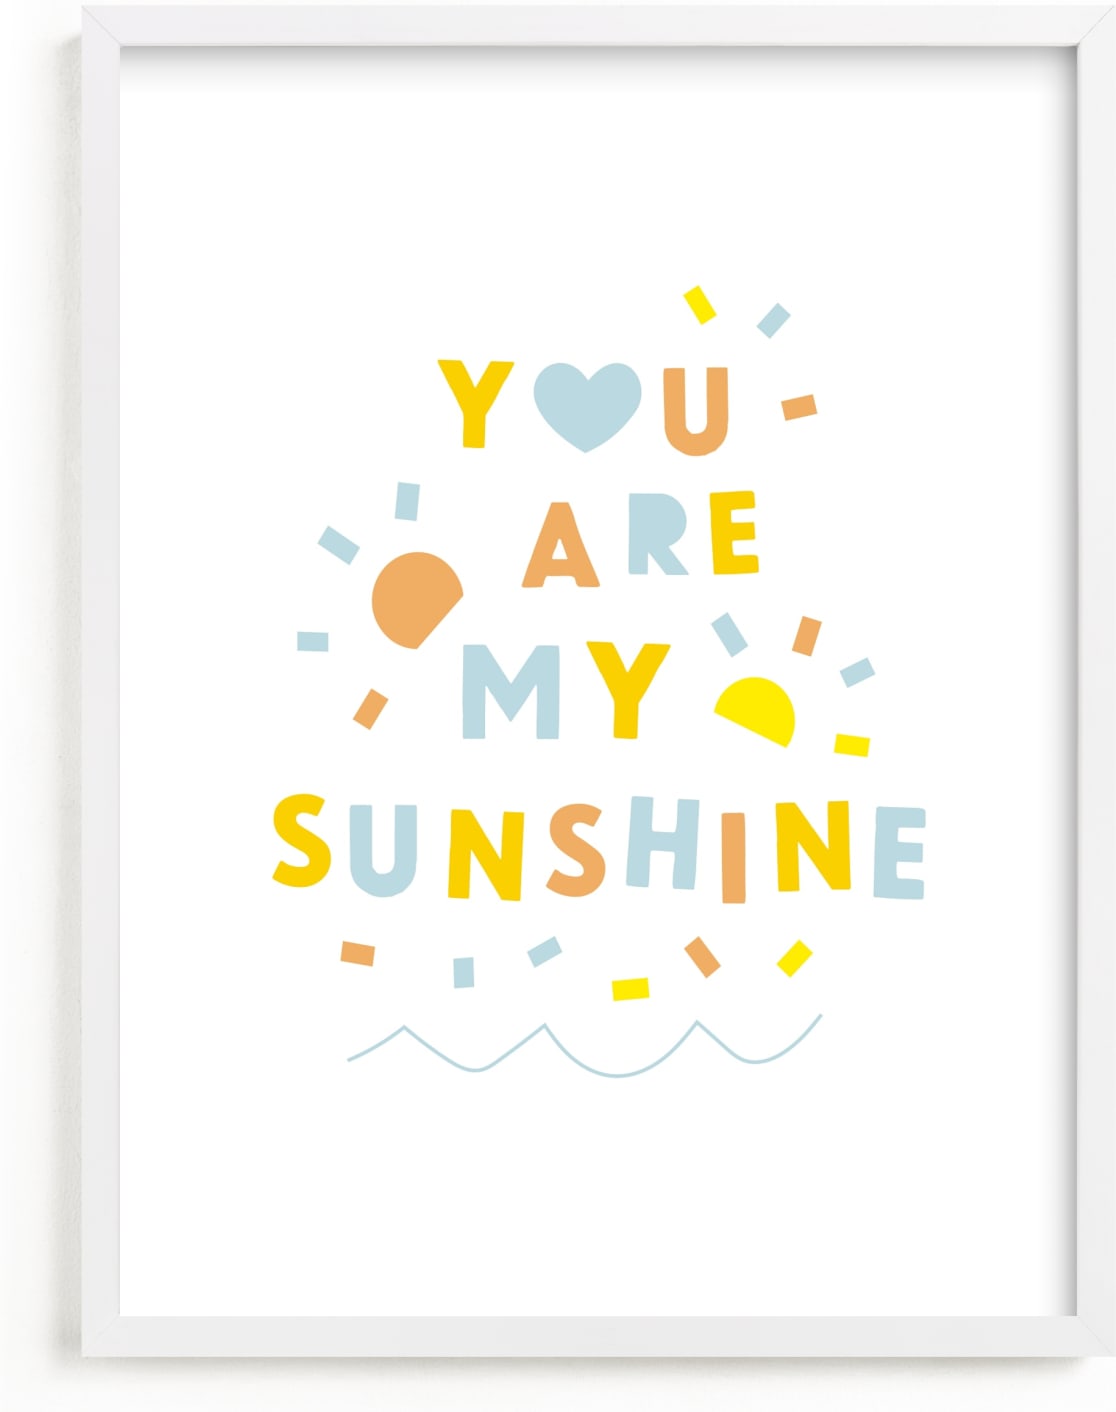 This is a colorful kids wall art by Ariel Rutland called Sunshine Letters.